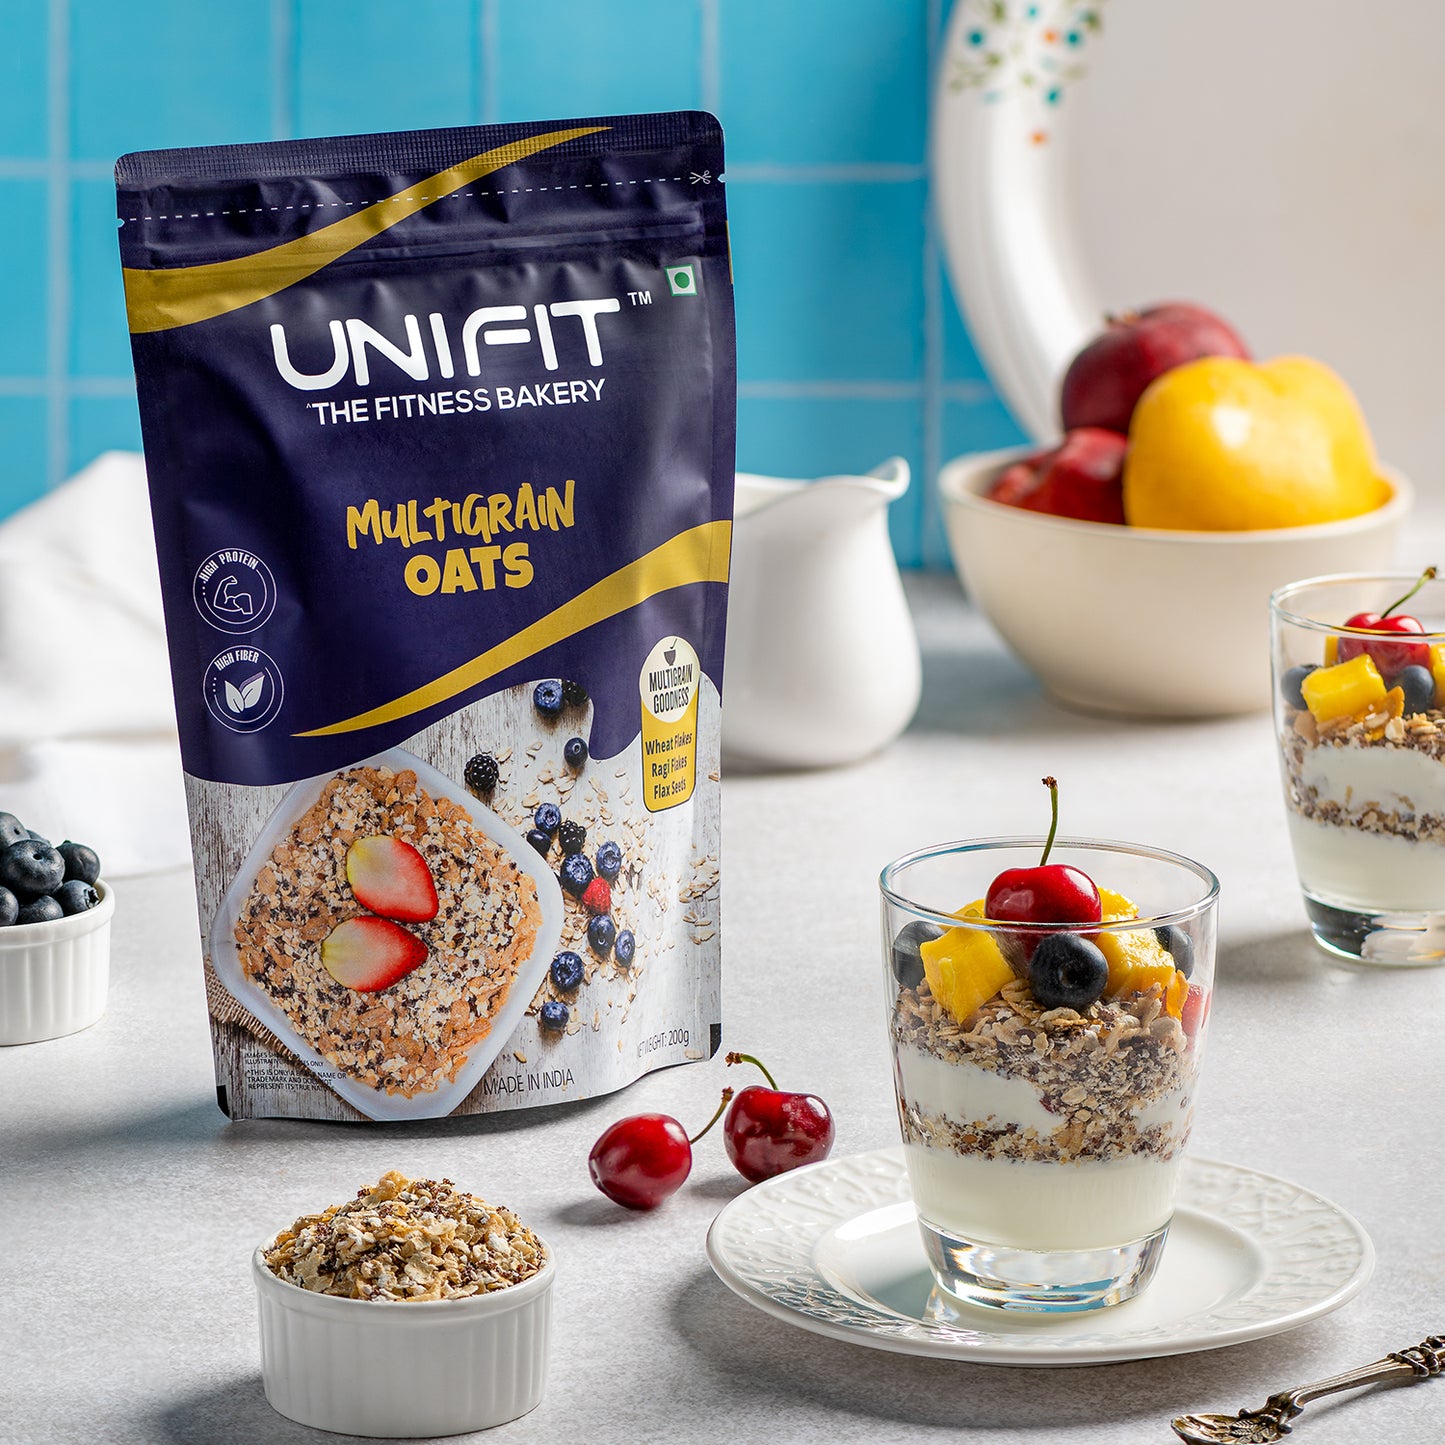 UNIFIT Multigrain Oats: Wholesome Breakfast Choice with Nutritional Goodness. 